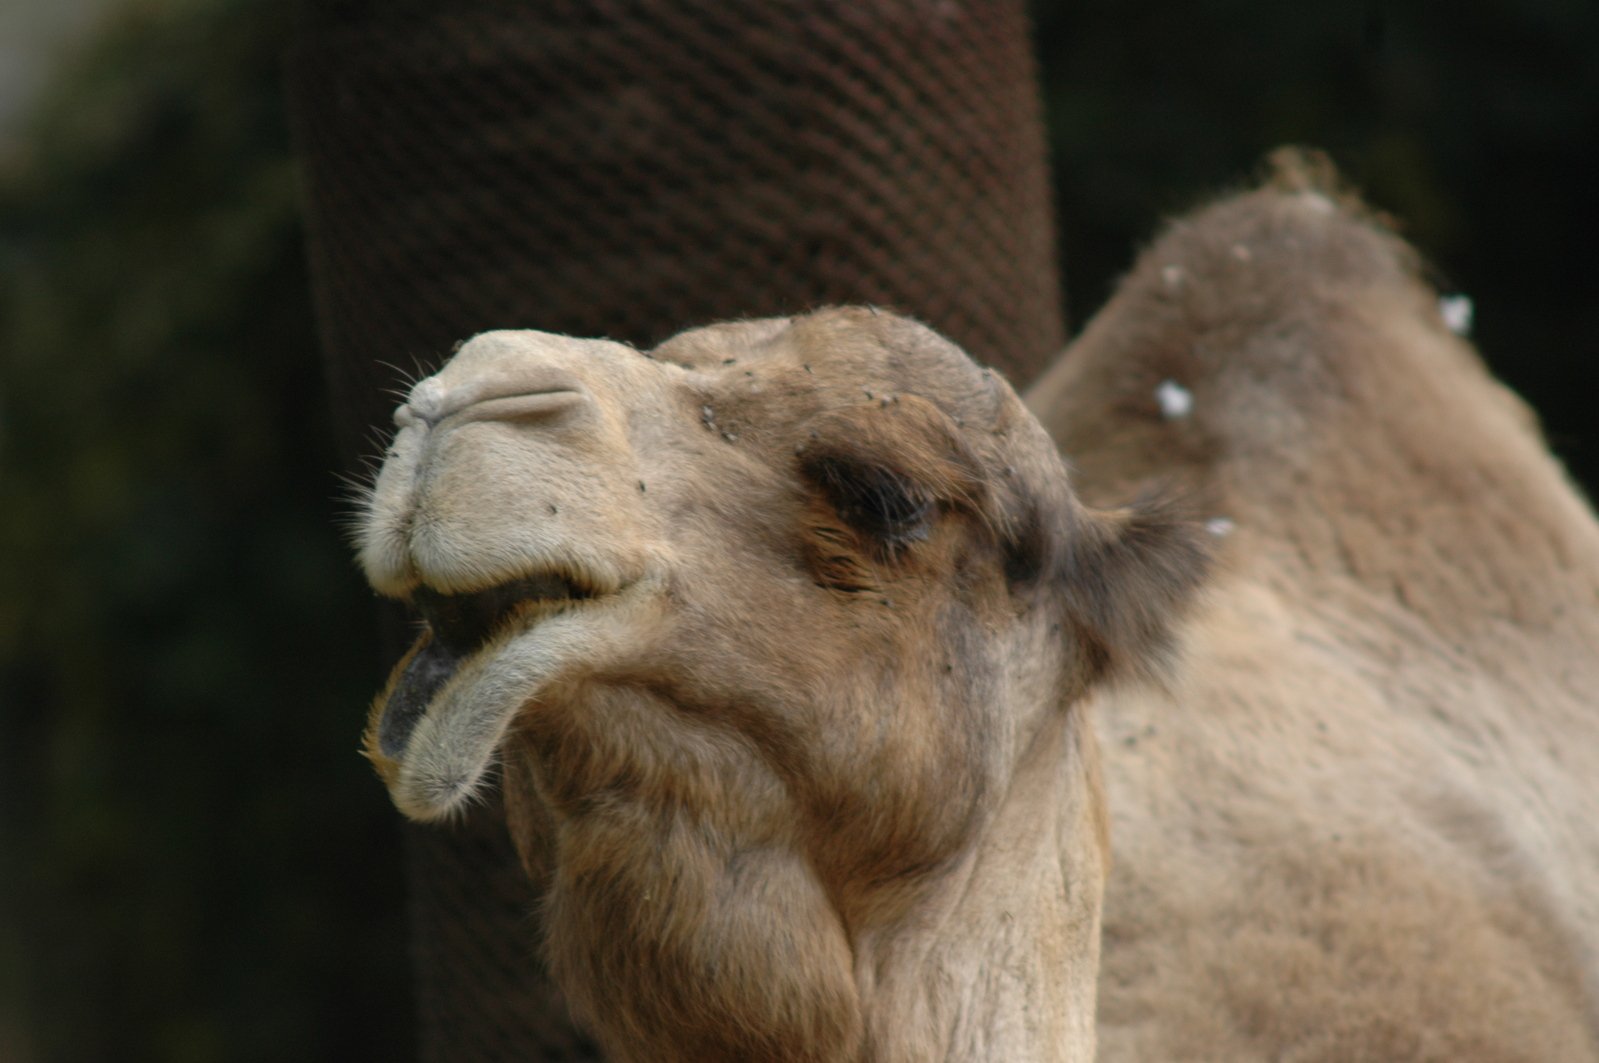 a camel sticking its head in the air and smiling